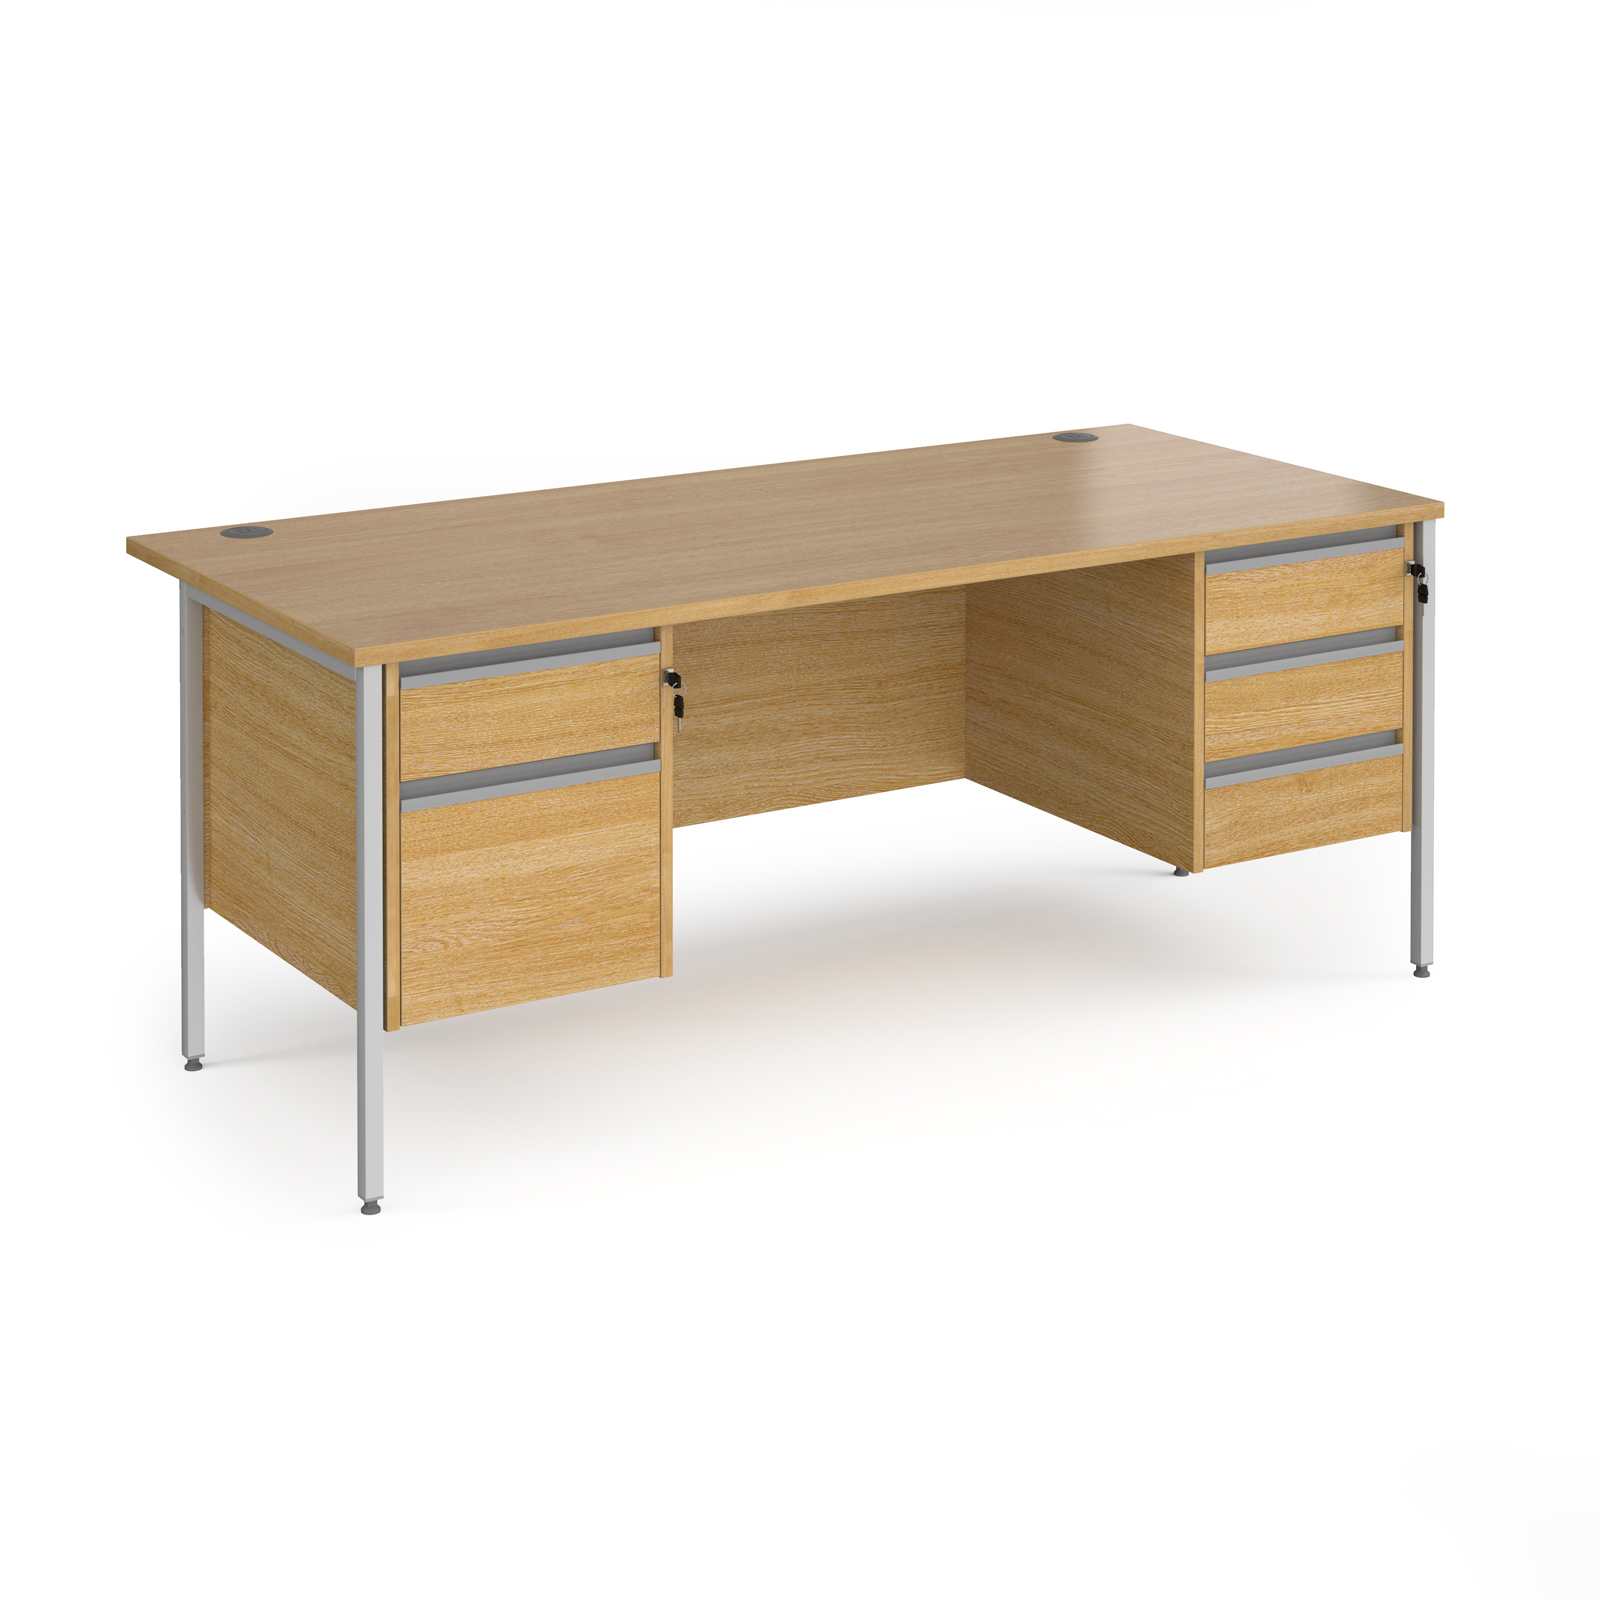 Contract 25 H-Frame straight desk with 2 and 3 drawer peds